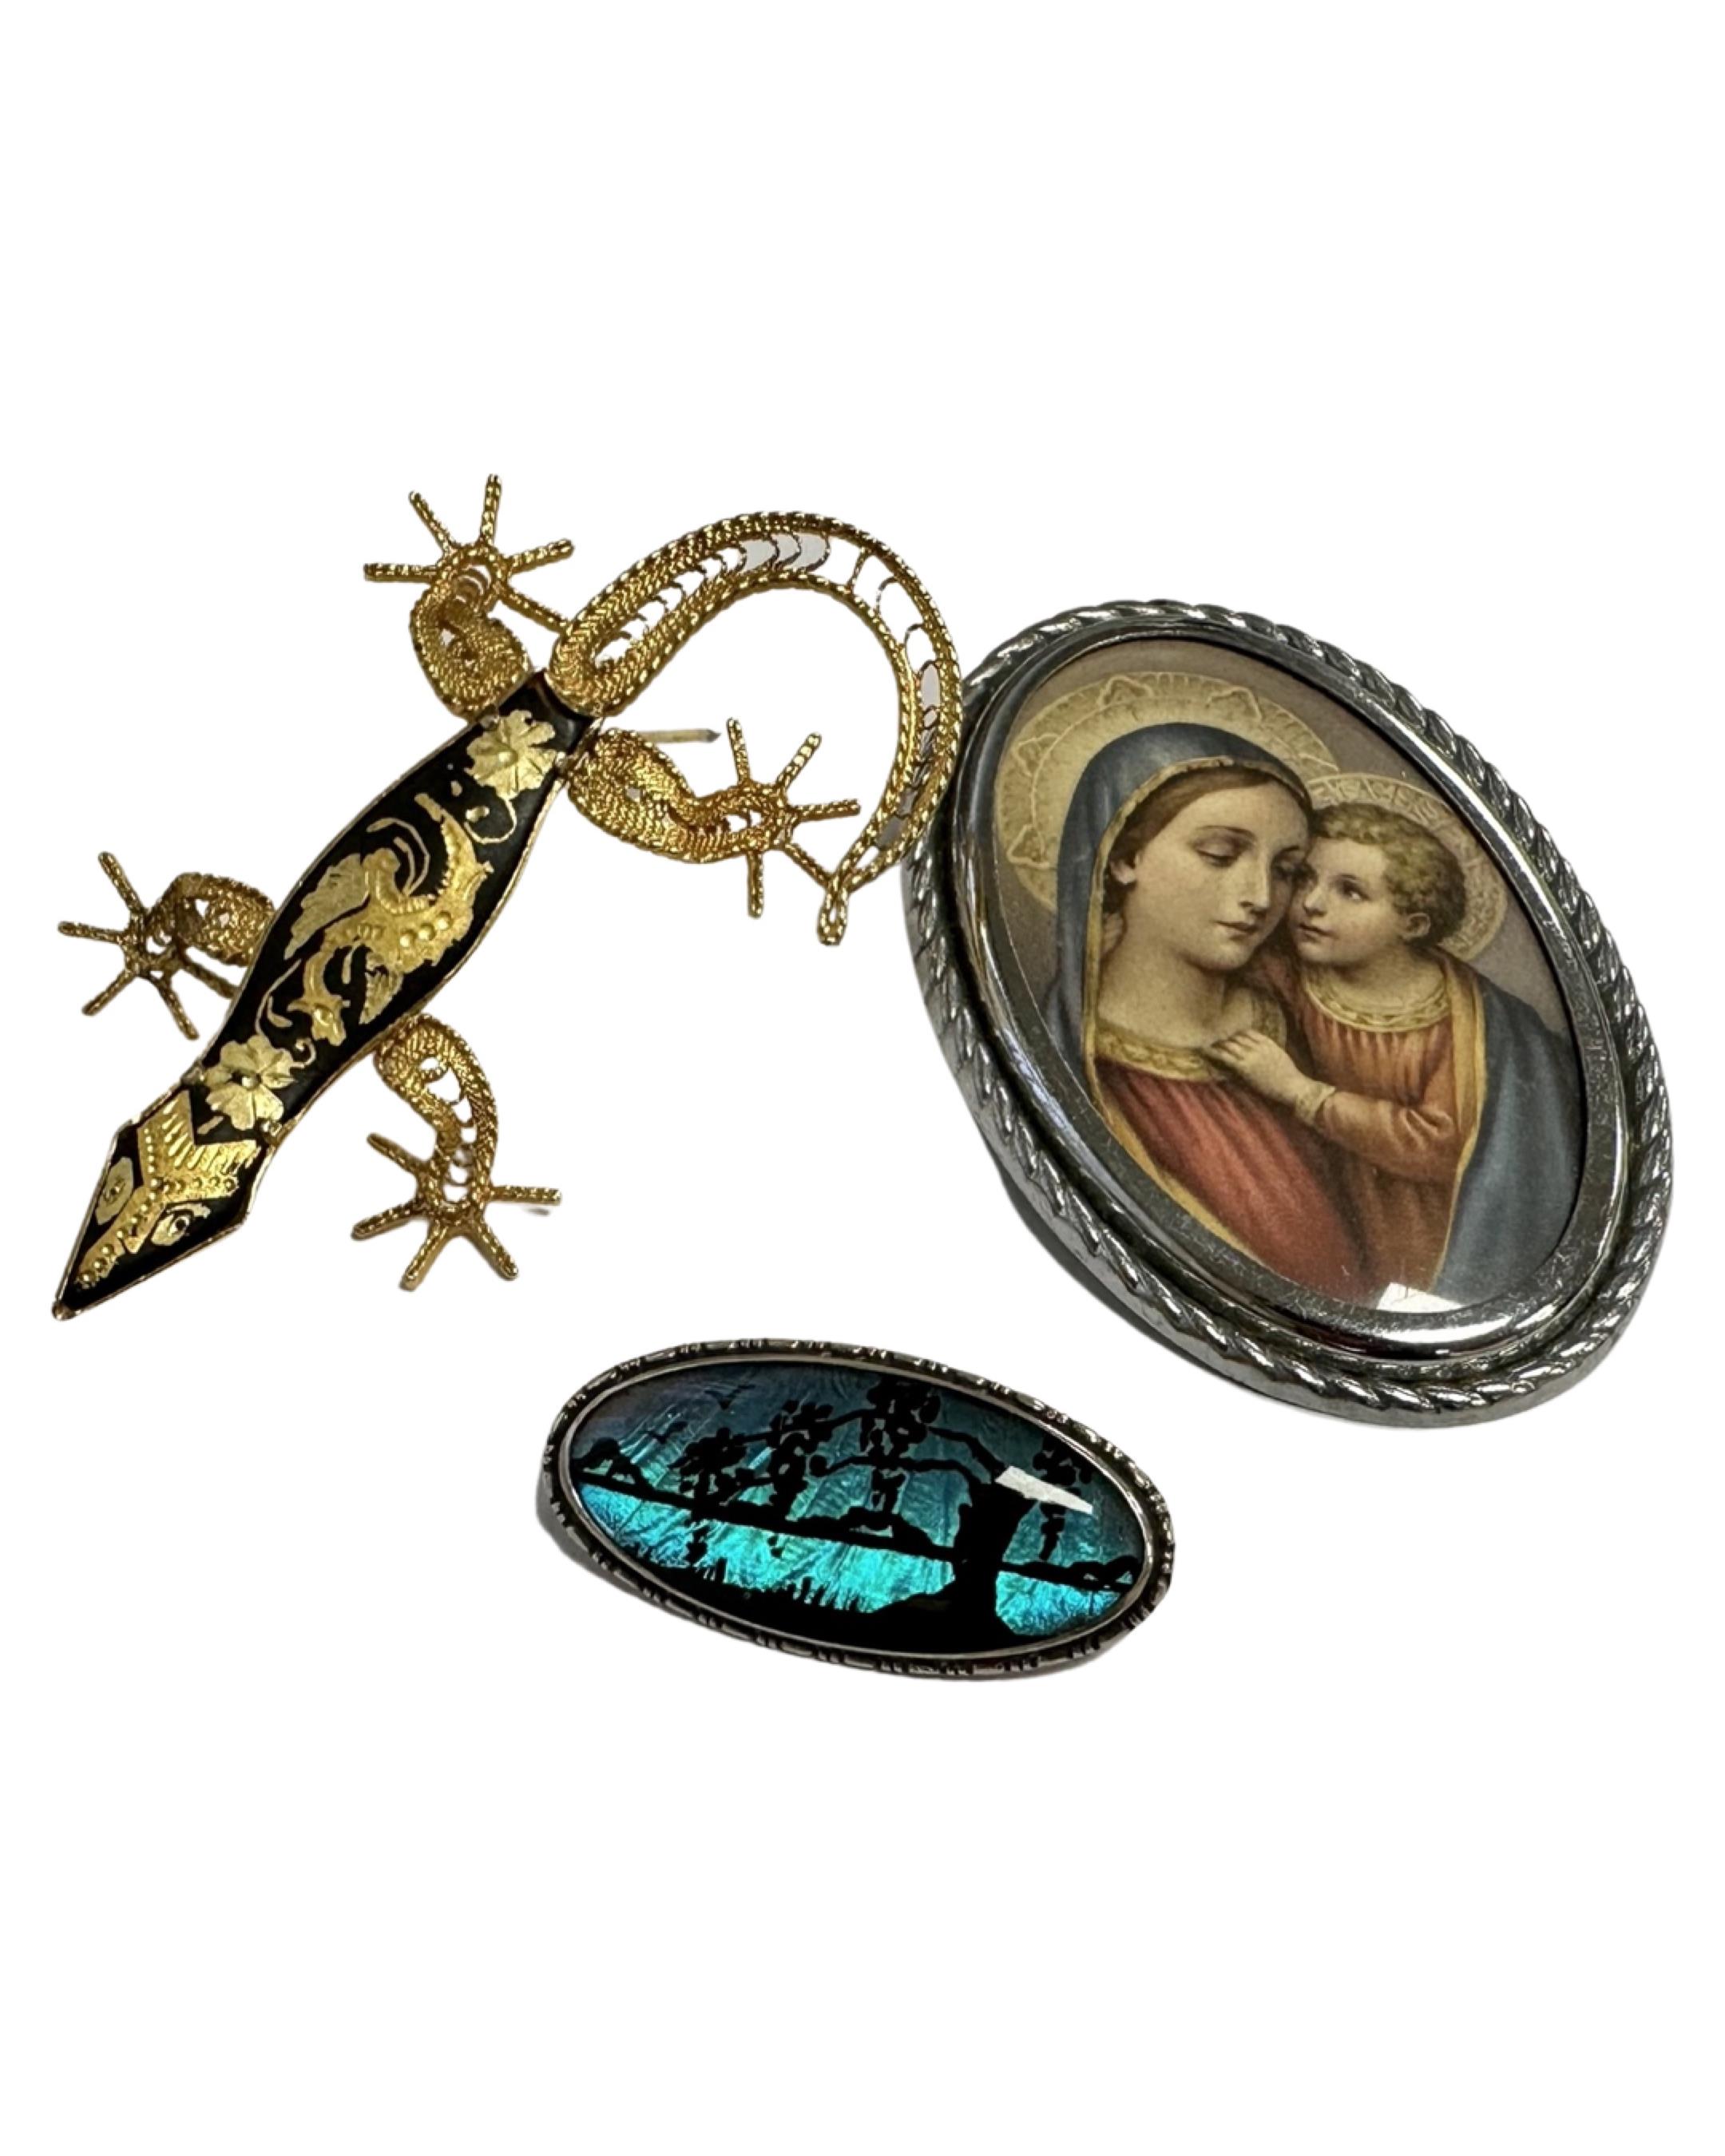 A yellow metal filigree lizard brooch together with Religious brooch and Sterling silver butterfly